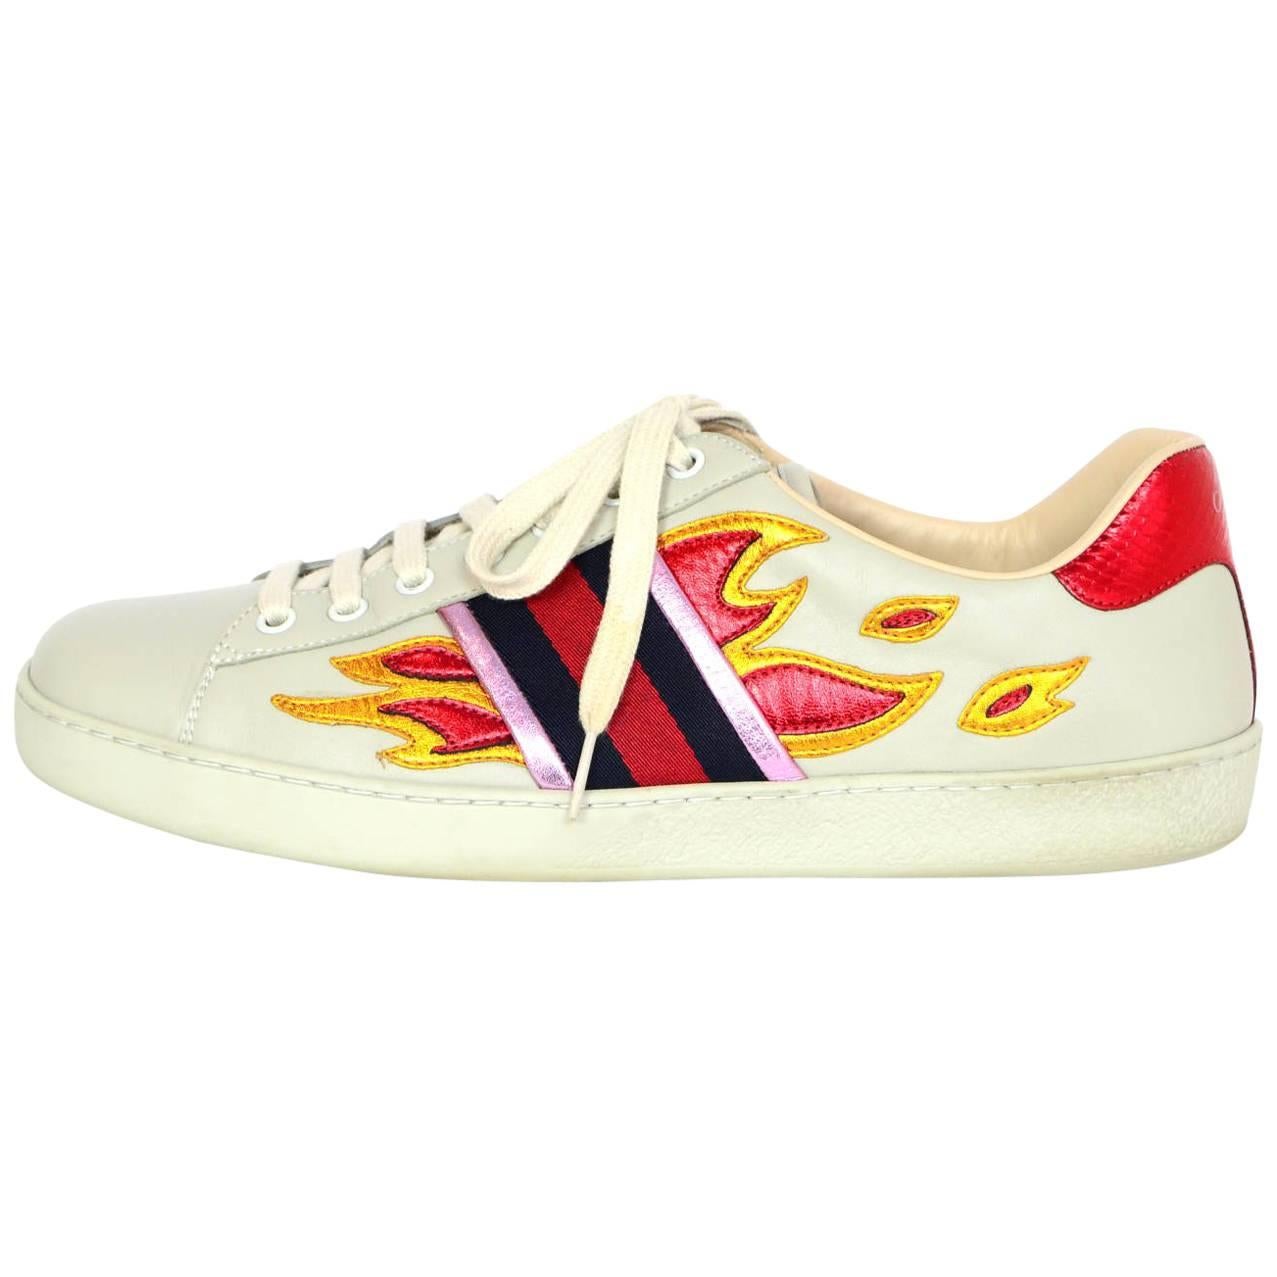 Gucci Men's Ace Off White Leather Flame Sneakers Sz 10 with DB